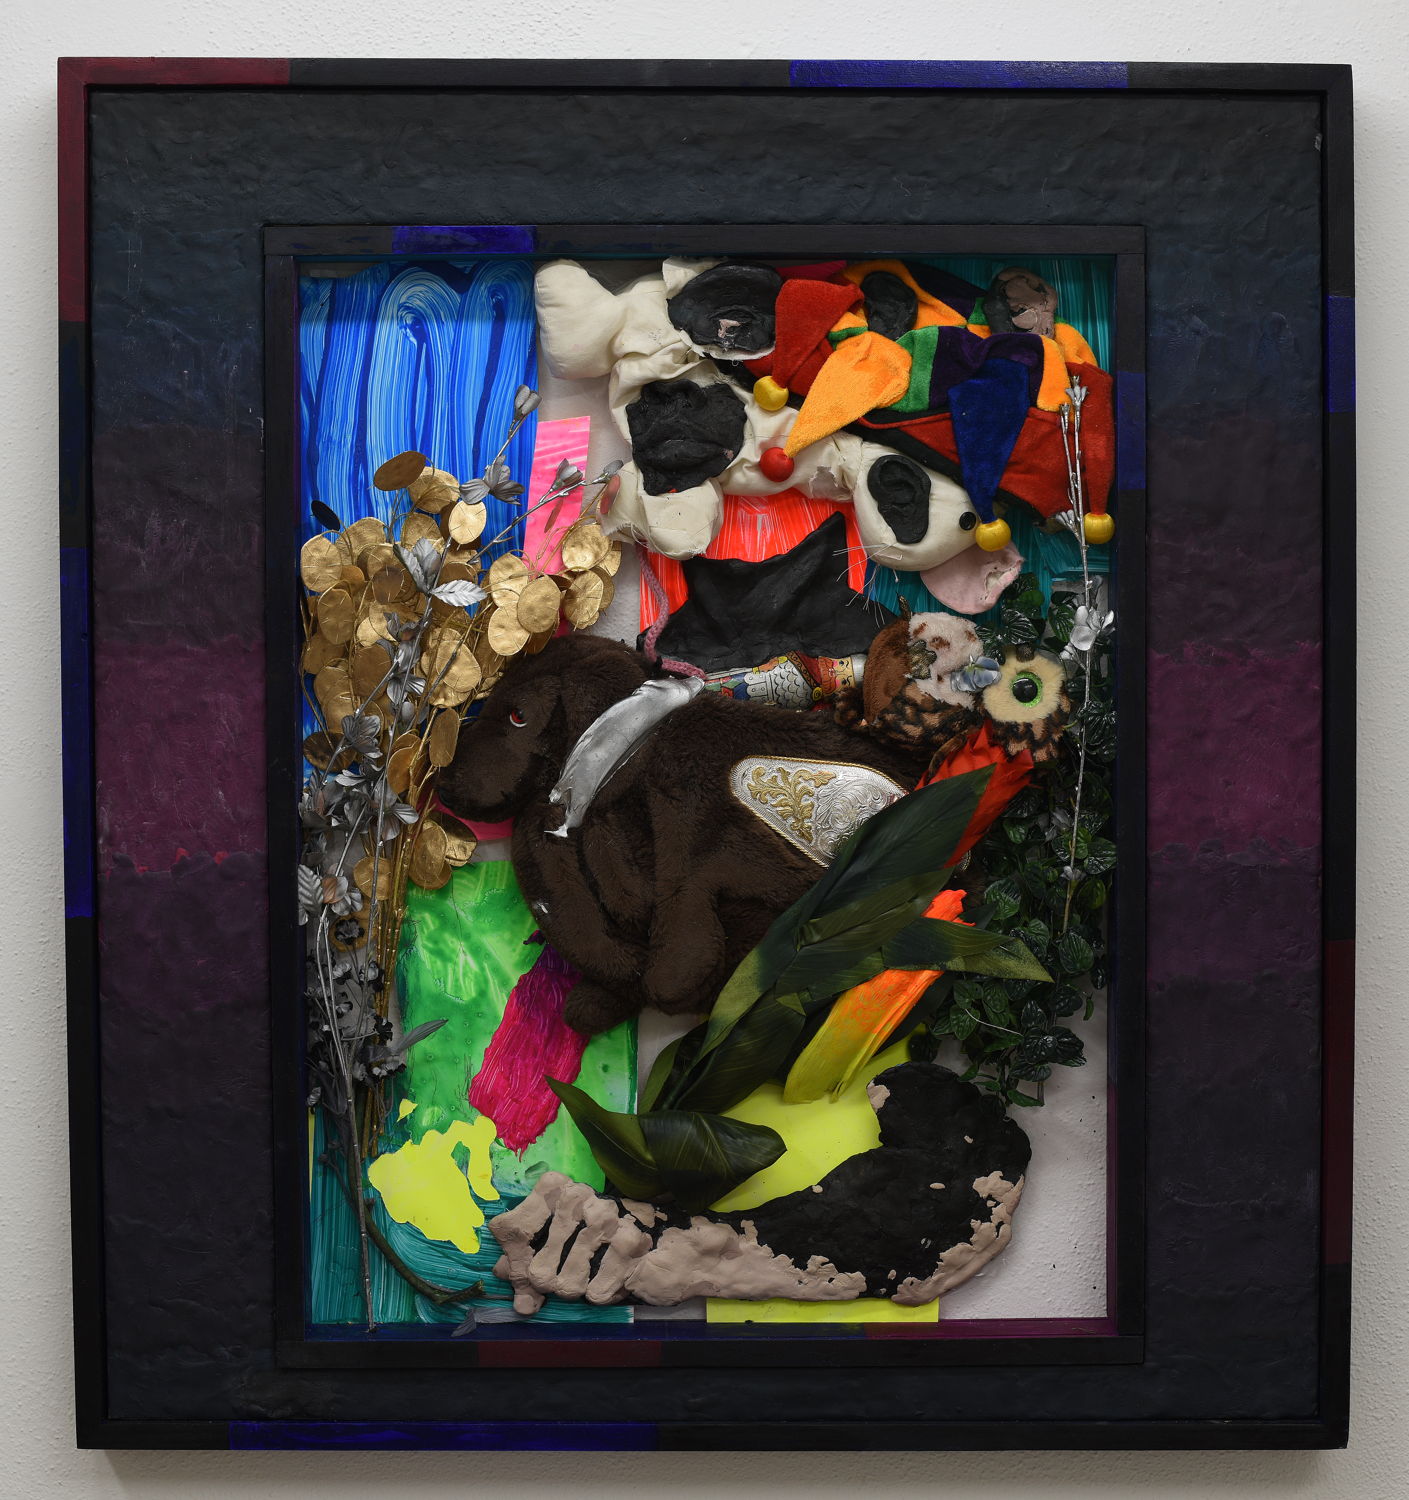 Rashawn Griffin, Self Portrait, 2022, Epoxy clay, pigment, gouache, oil and acrylic, wood, varied materials, 94.5 x 90 x 7.5 cm. Courtesy the artist and Ballon Rouge